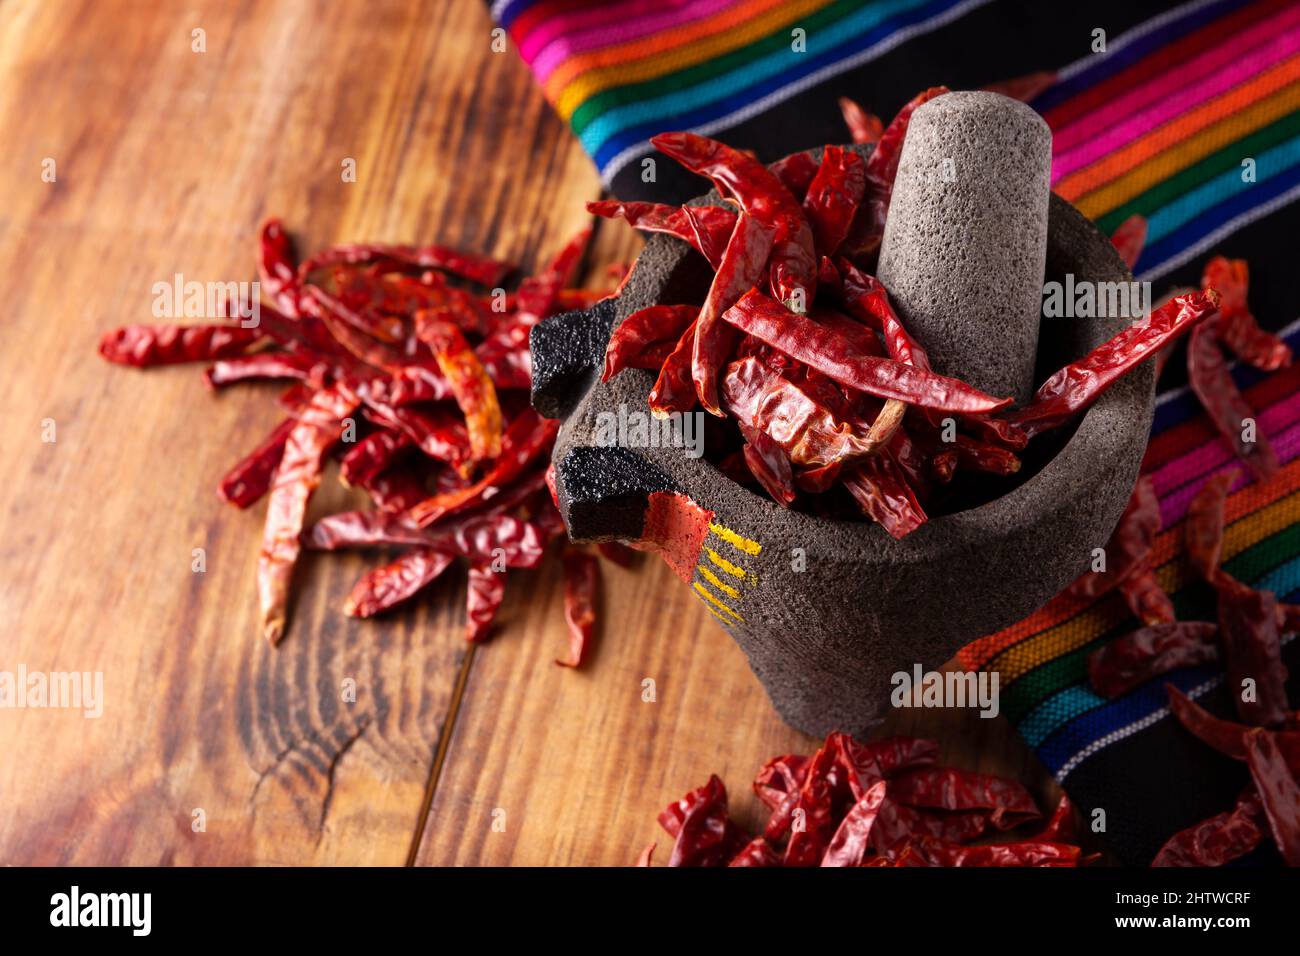 Chile de Arbol. This potent Mexican chili can be used fresh, powdered or dried for salsa preparation and a variety of Mexican dishes. Stock Photo